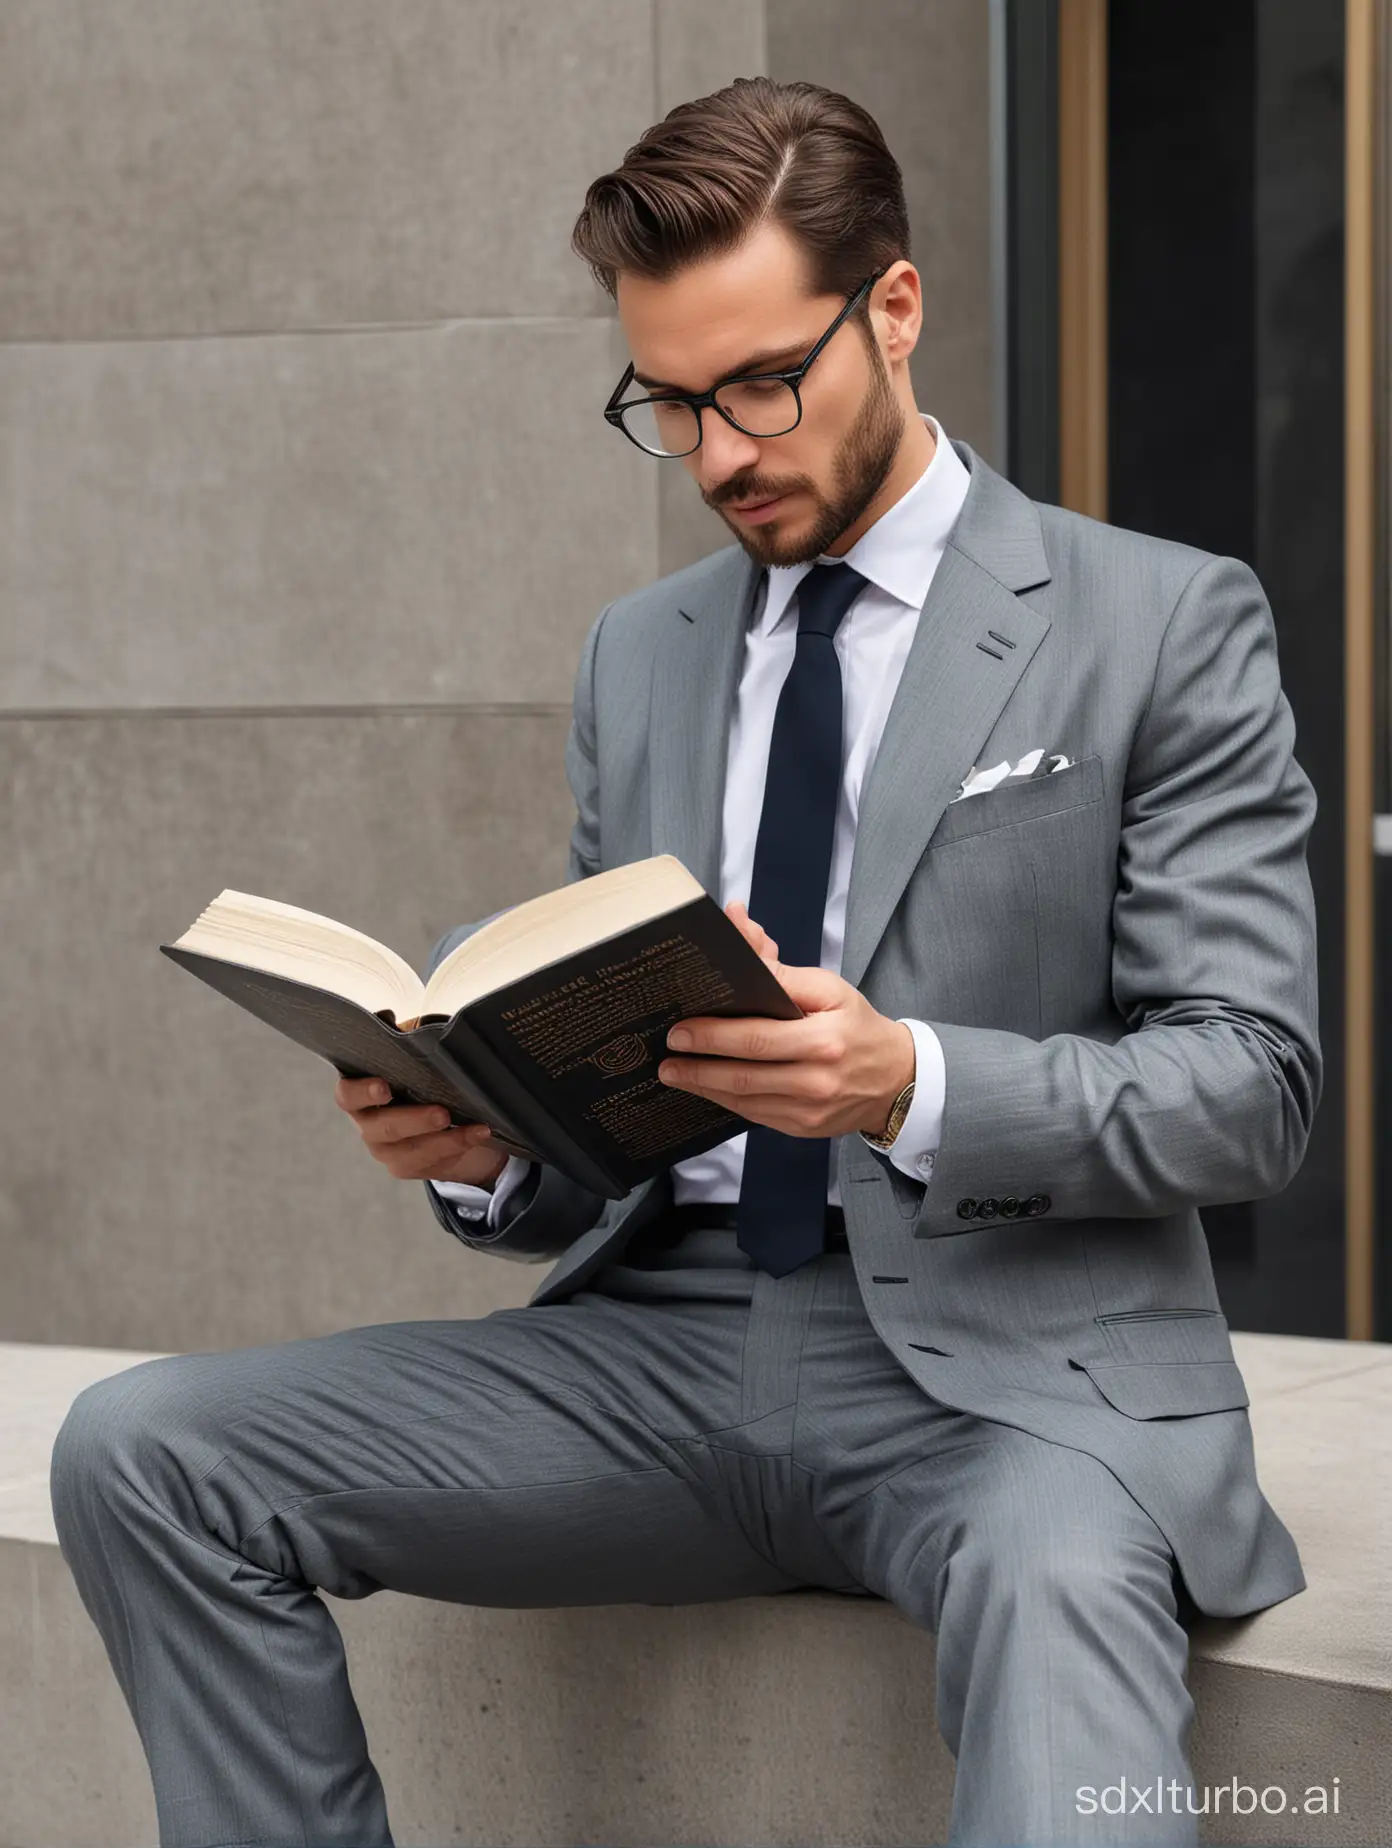 WellDressed-Gentleman-in-Urban-Library-Reading-a-Classic-Novel